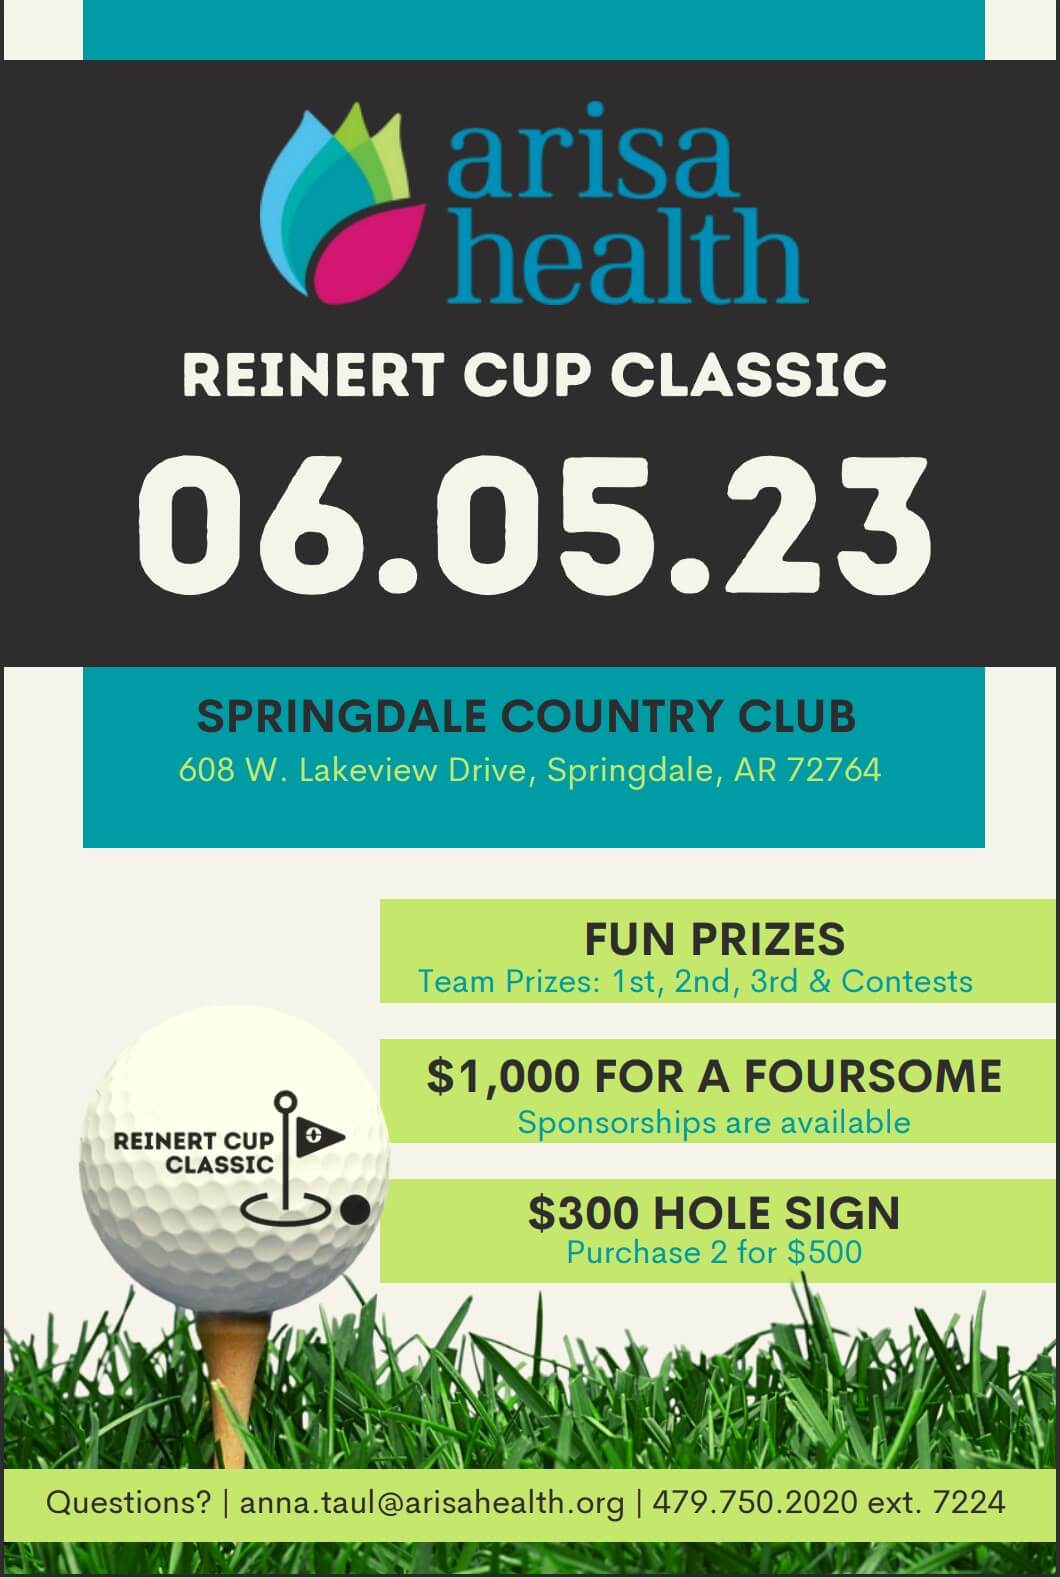 2023 - Reinert Cup Classic at Springdale Country Club. 608 W. Likeview Dr., Springdale, Arkansas 72764